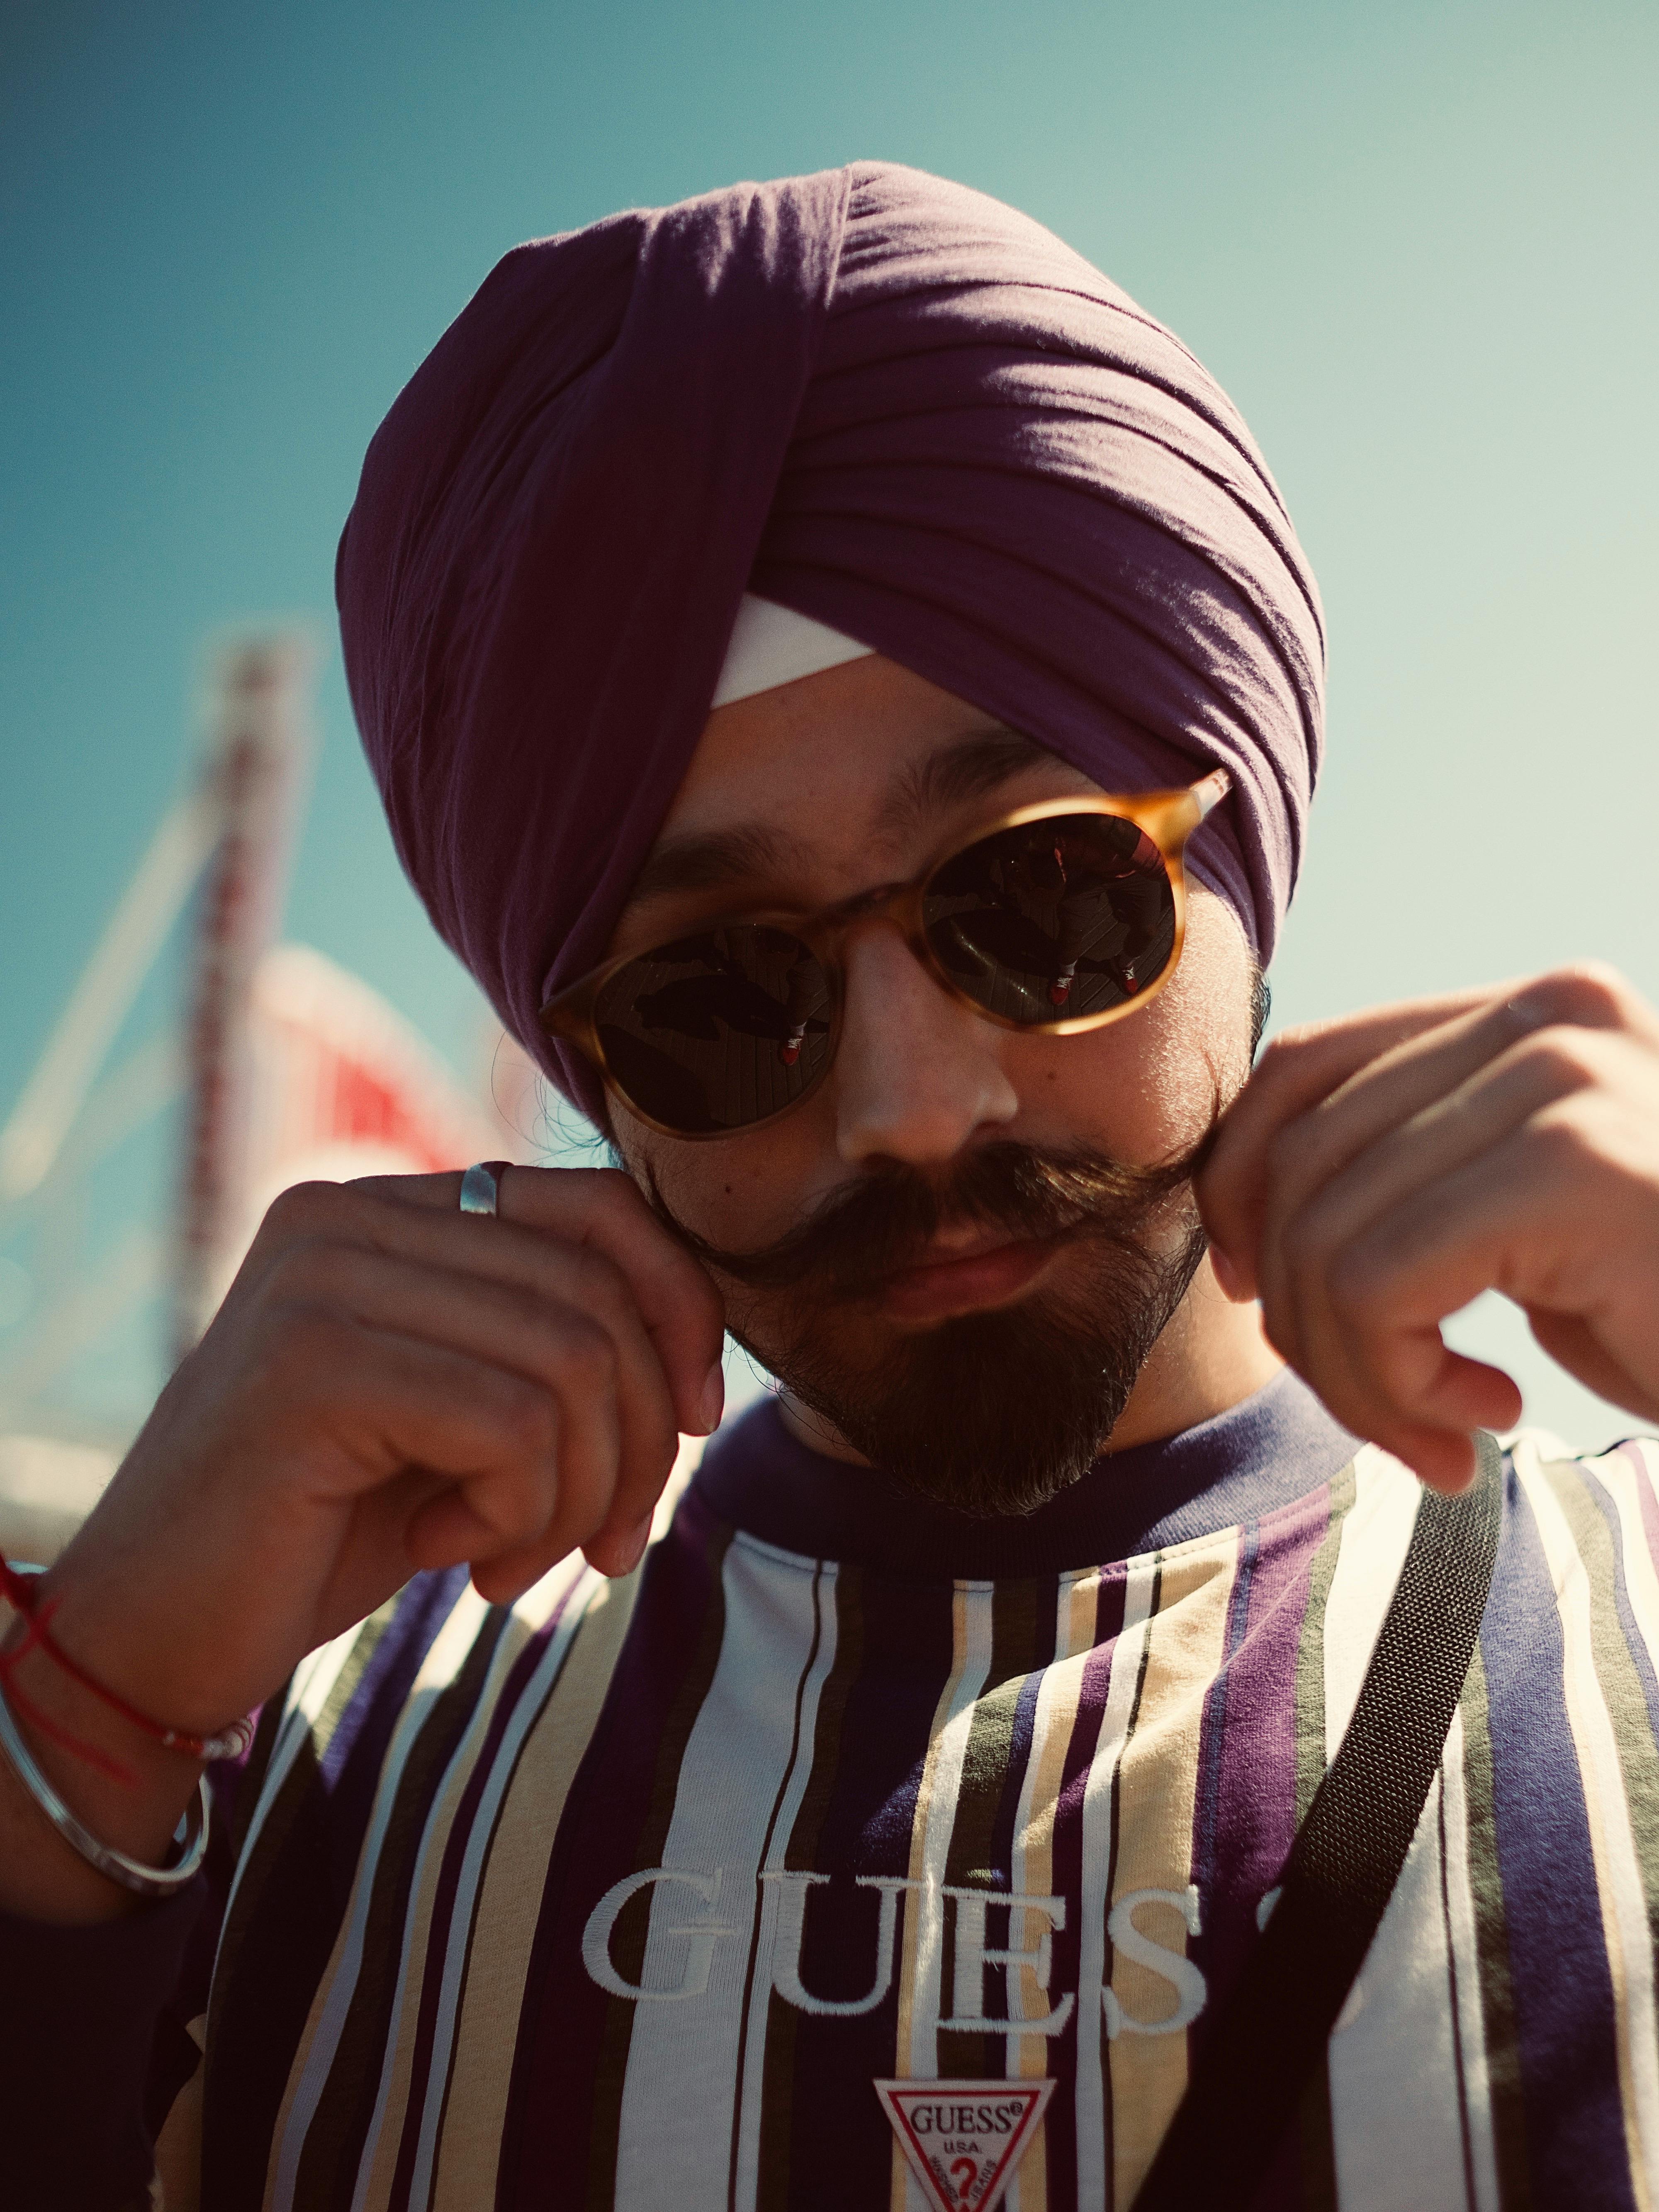 Free: Man Wearing Purple Turban and Black Clubmaster Sunglasses - nohat.cc